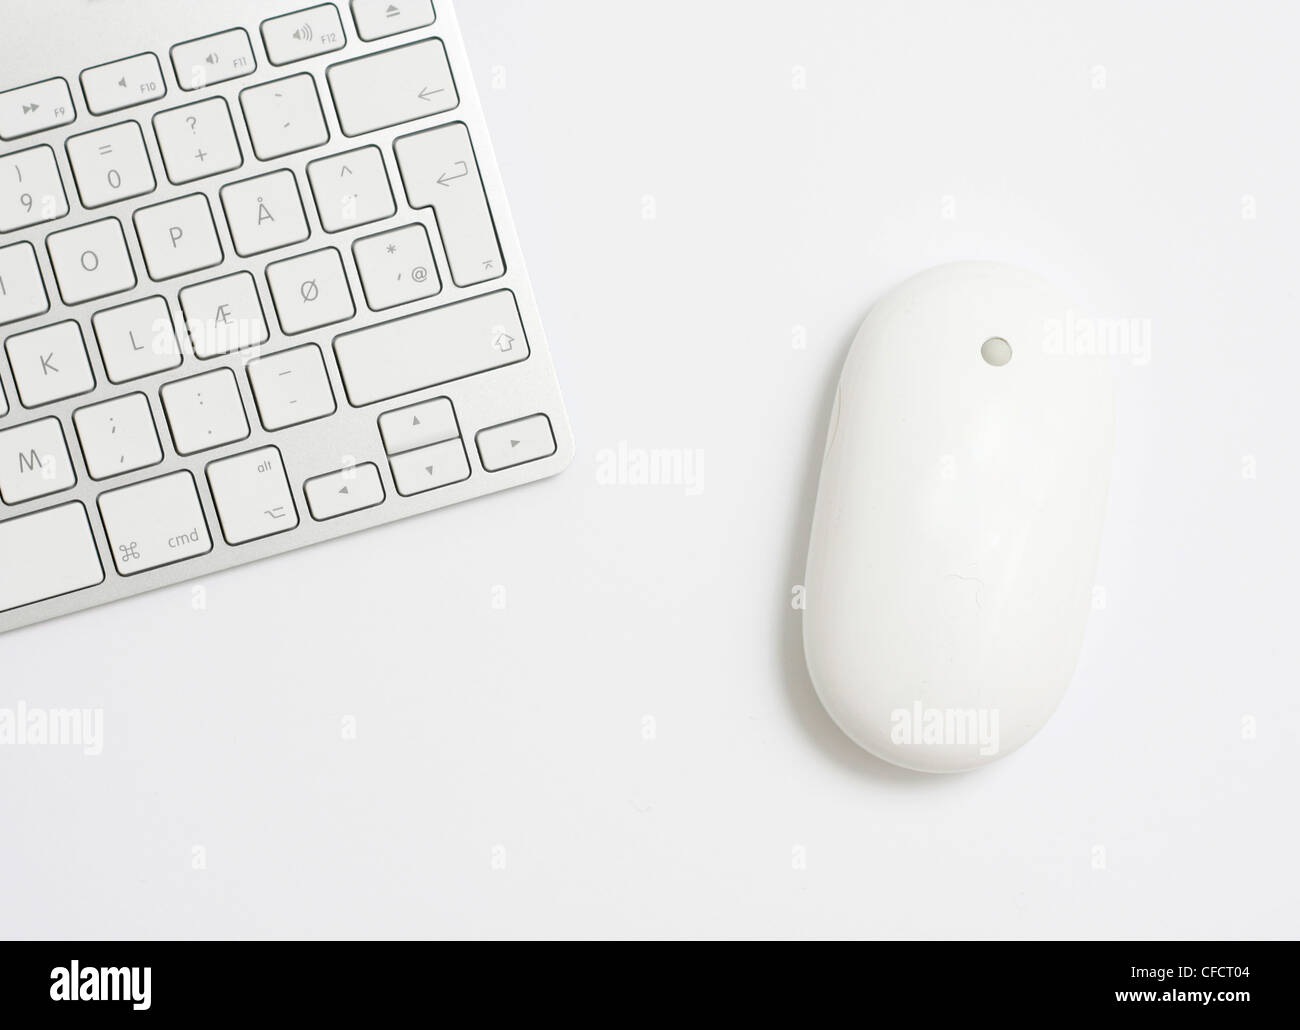 Mouse and keyboard Stock Photo